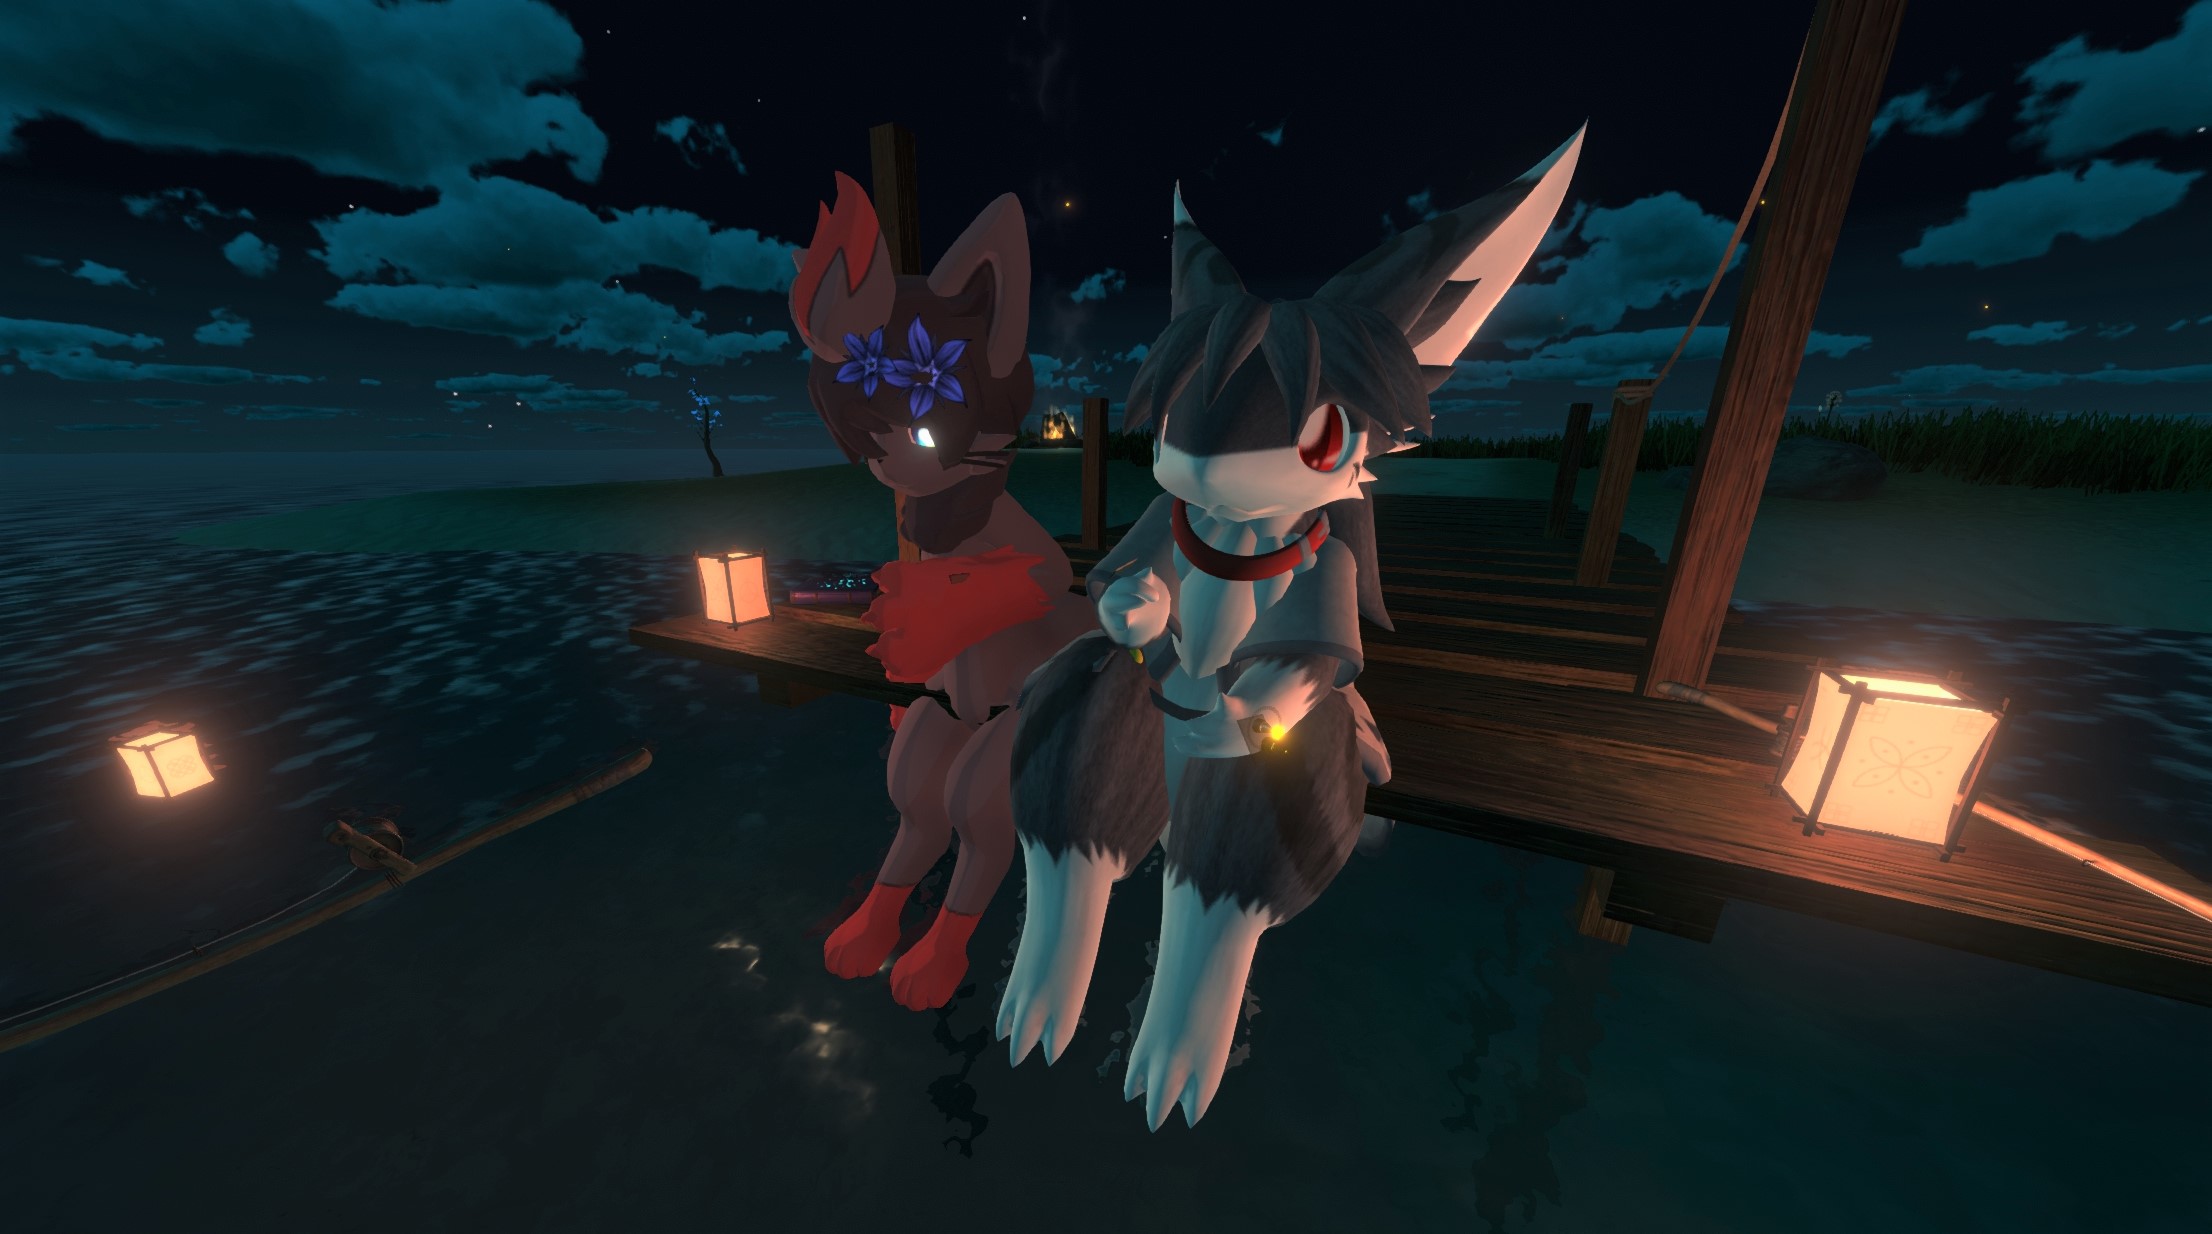 Two people with animal-like avatars sitting at the end of the dock on Firefly Island.